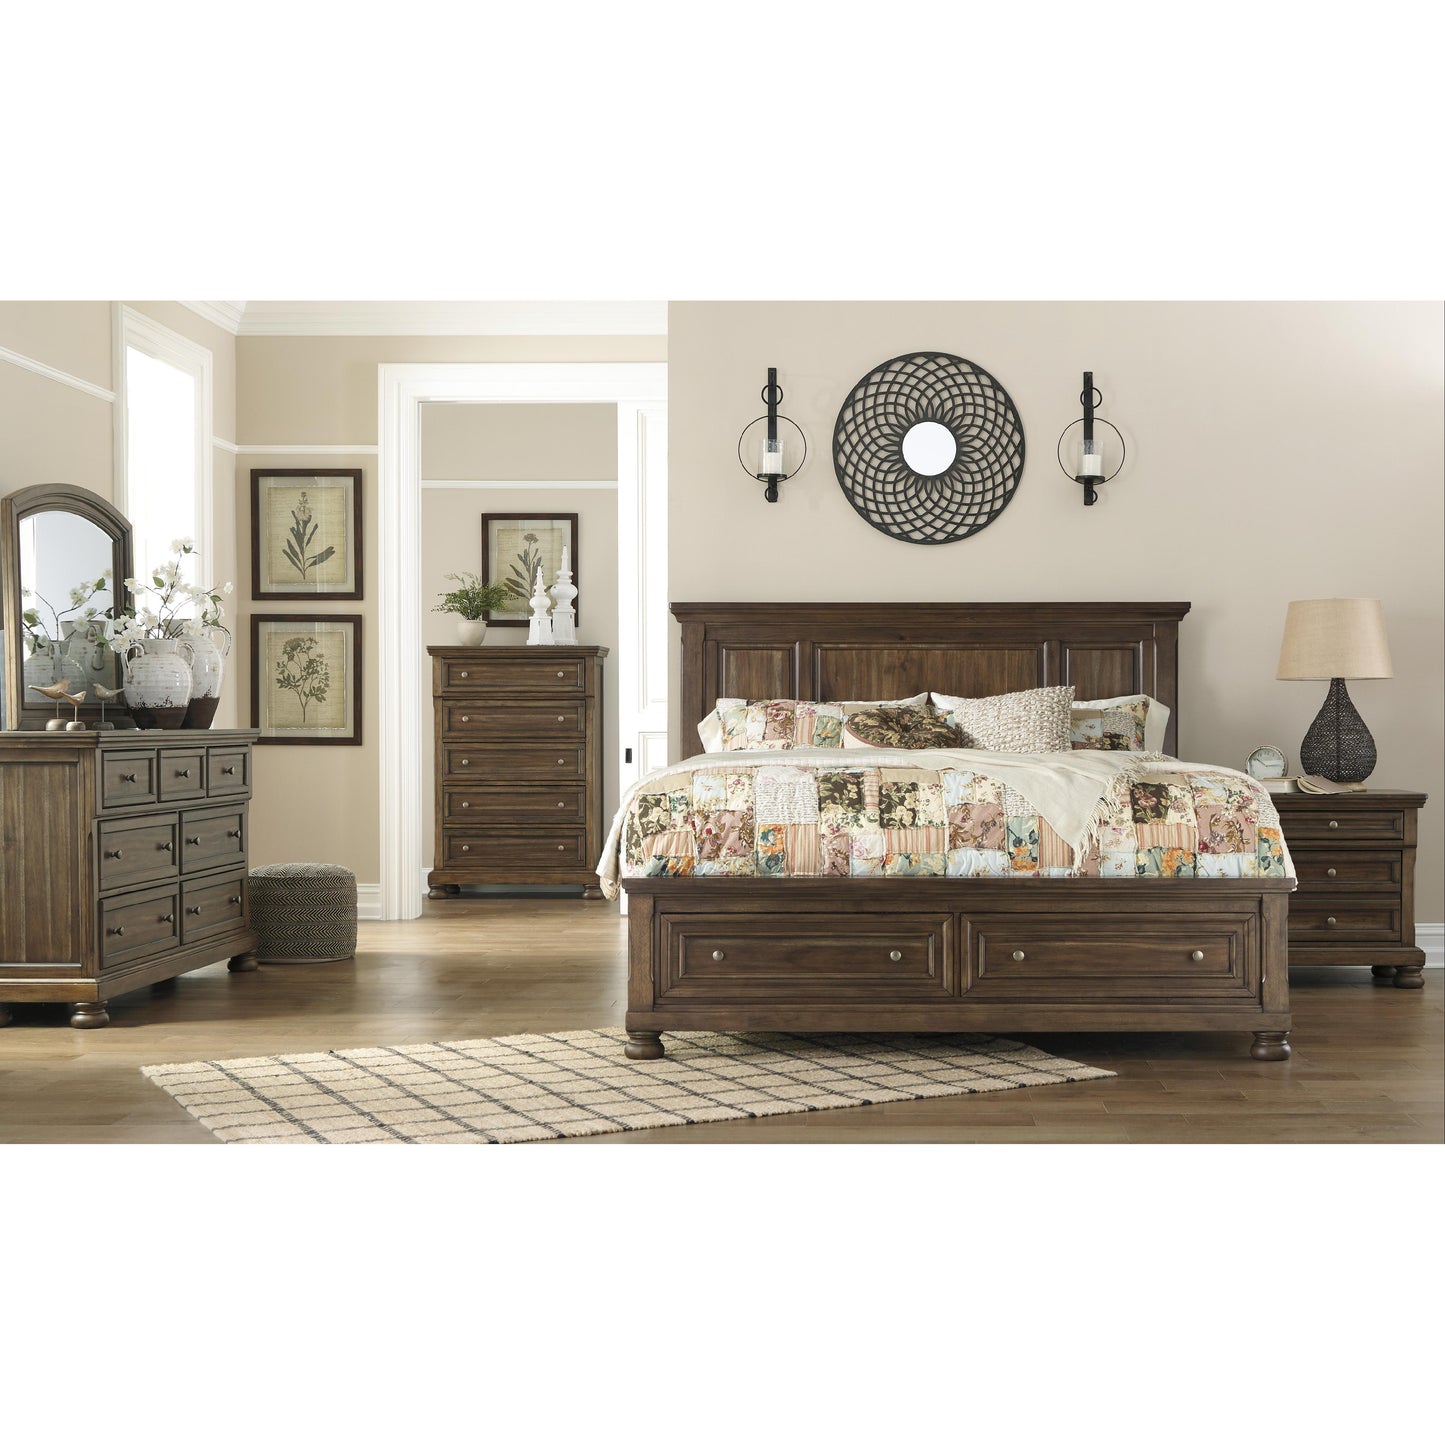 Signature Design by Ashley Flynnter B719 6 pc Queen Panel Storage Bedroom Set IMAGE 1